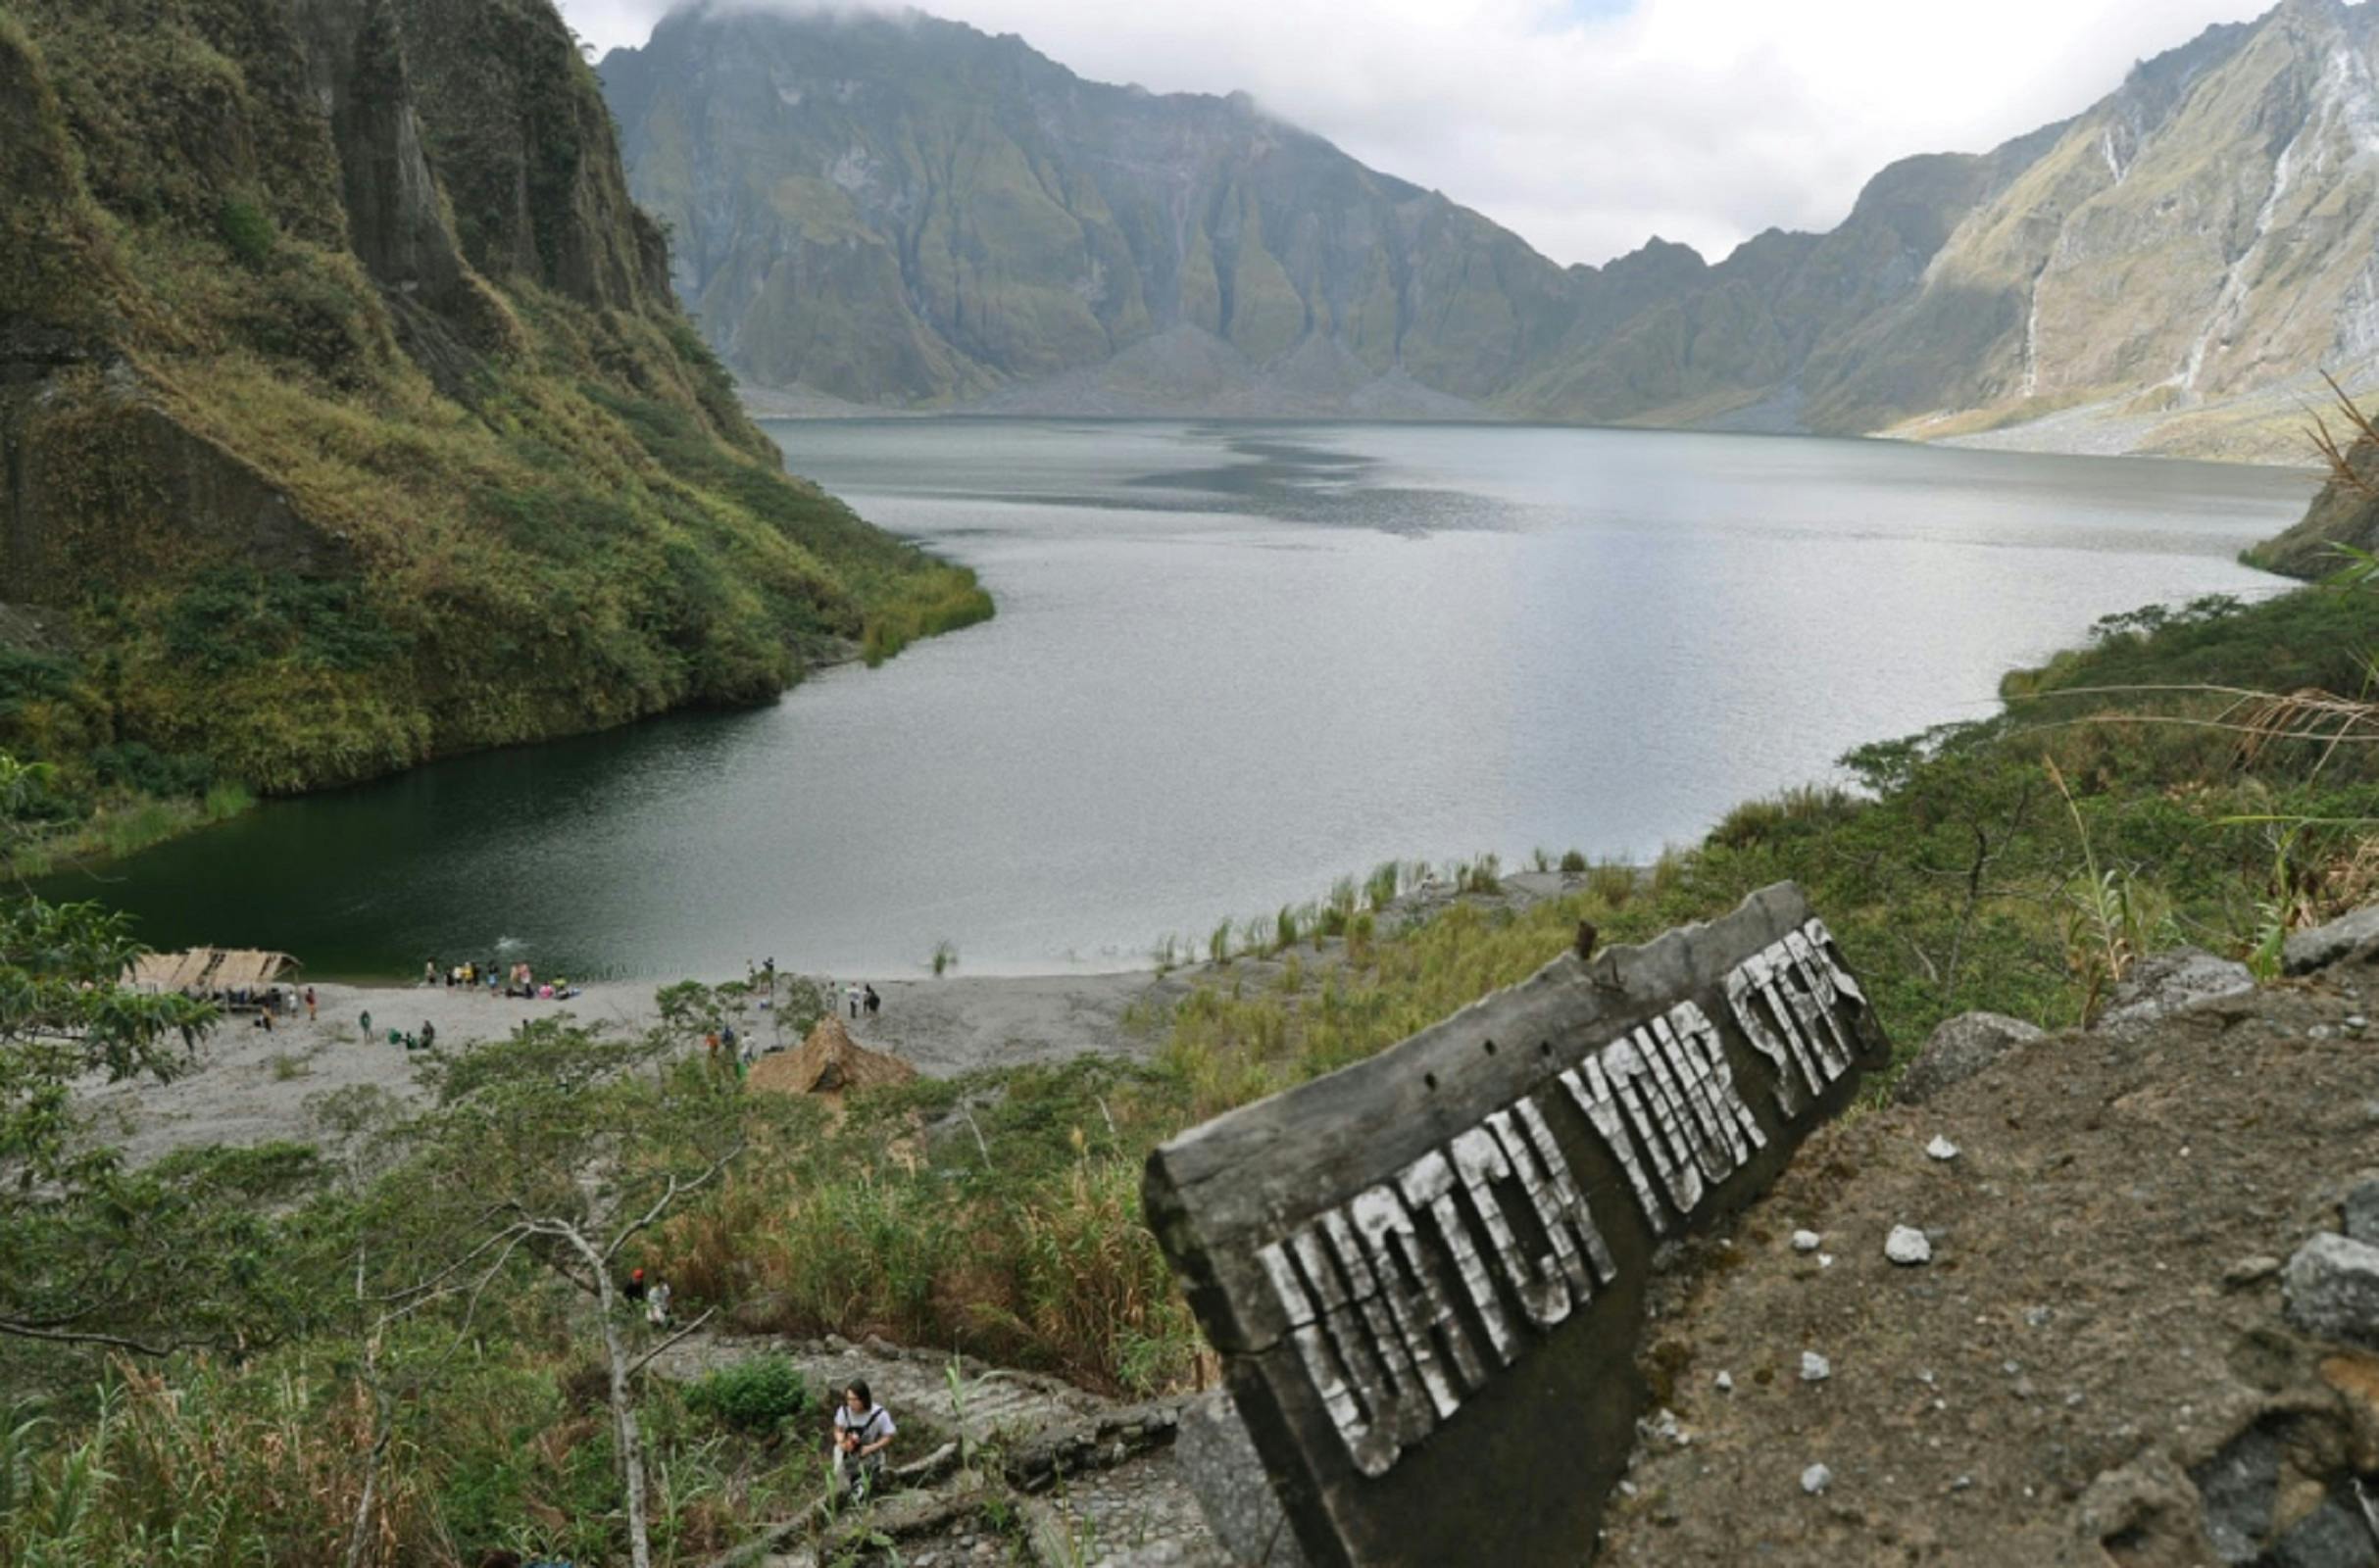 Guided Full Day Hike To Mt Pinatubo Crater Lake With 4x4 4109